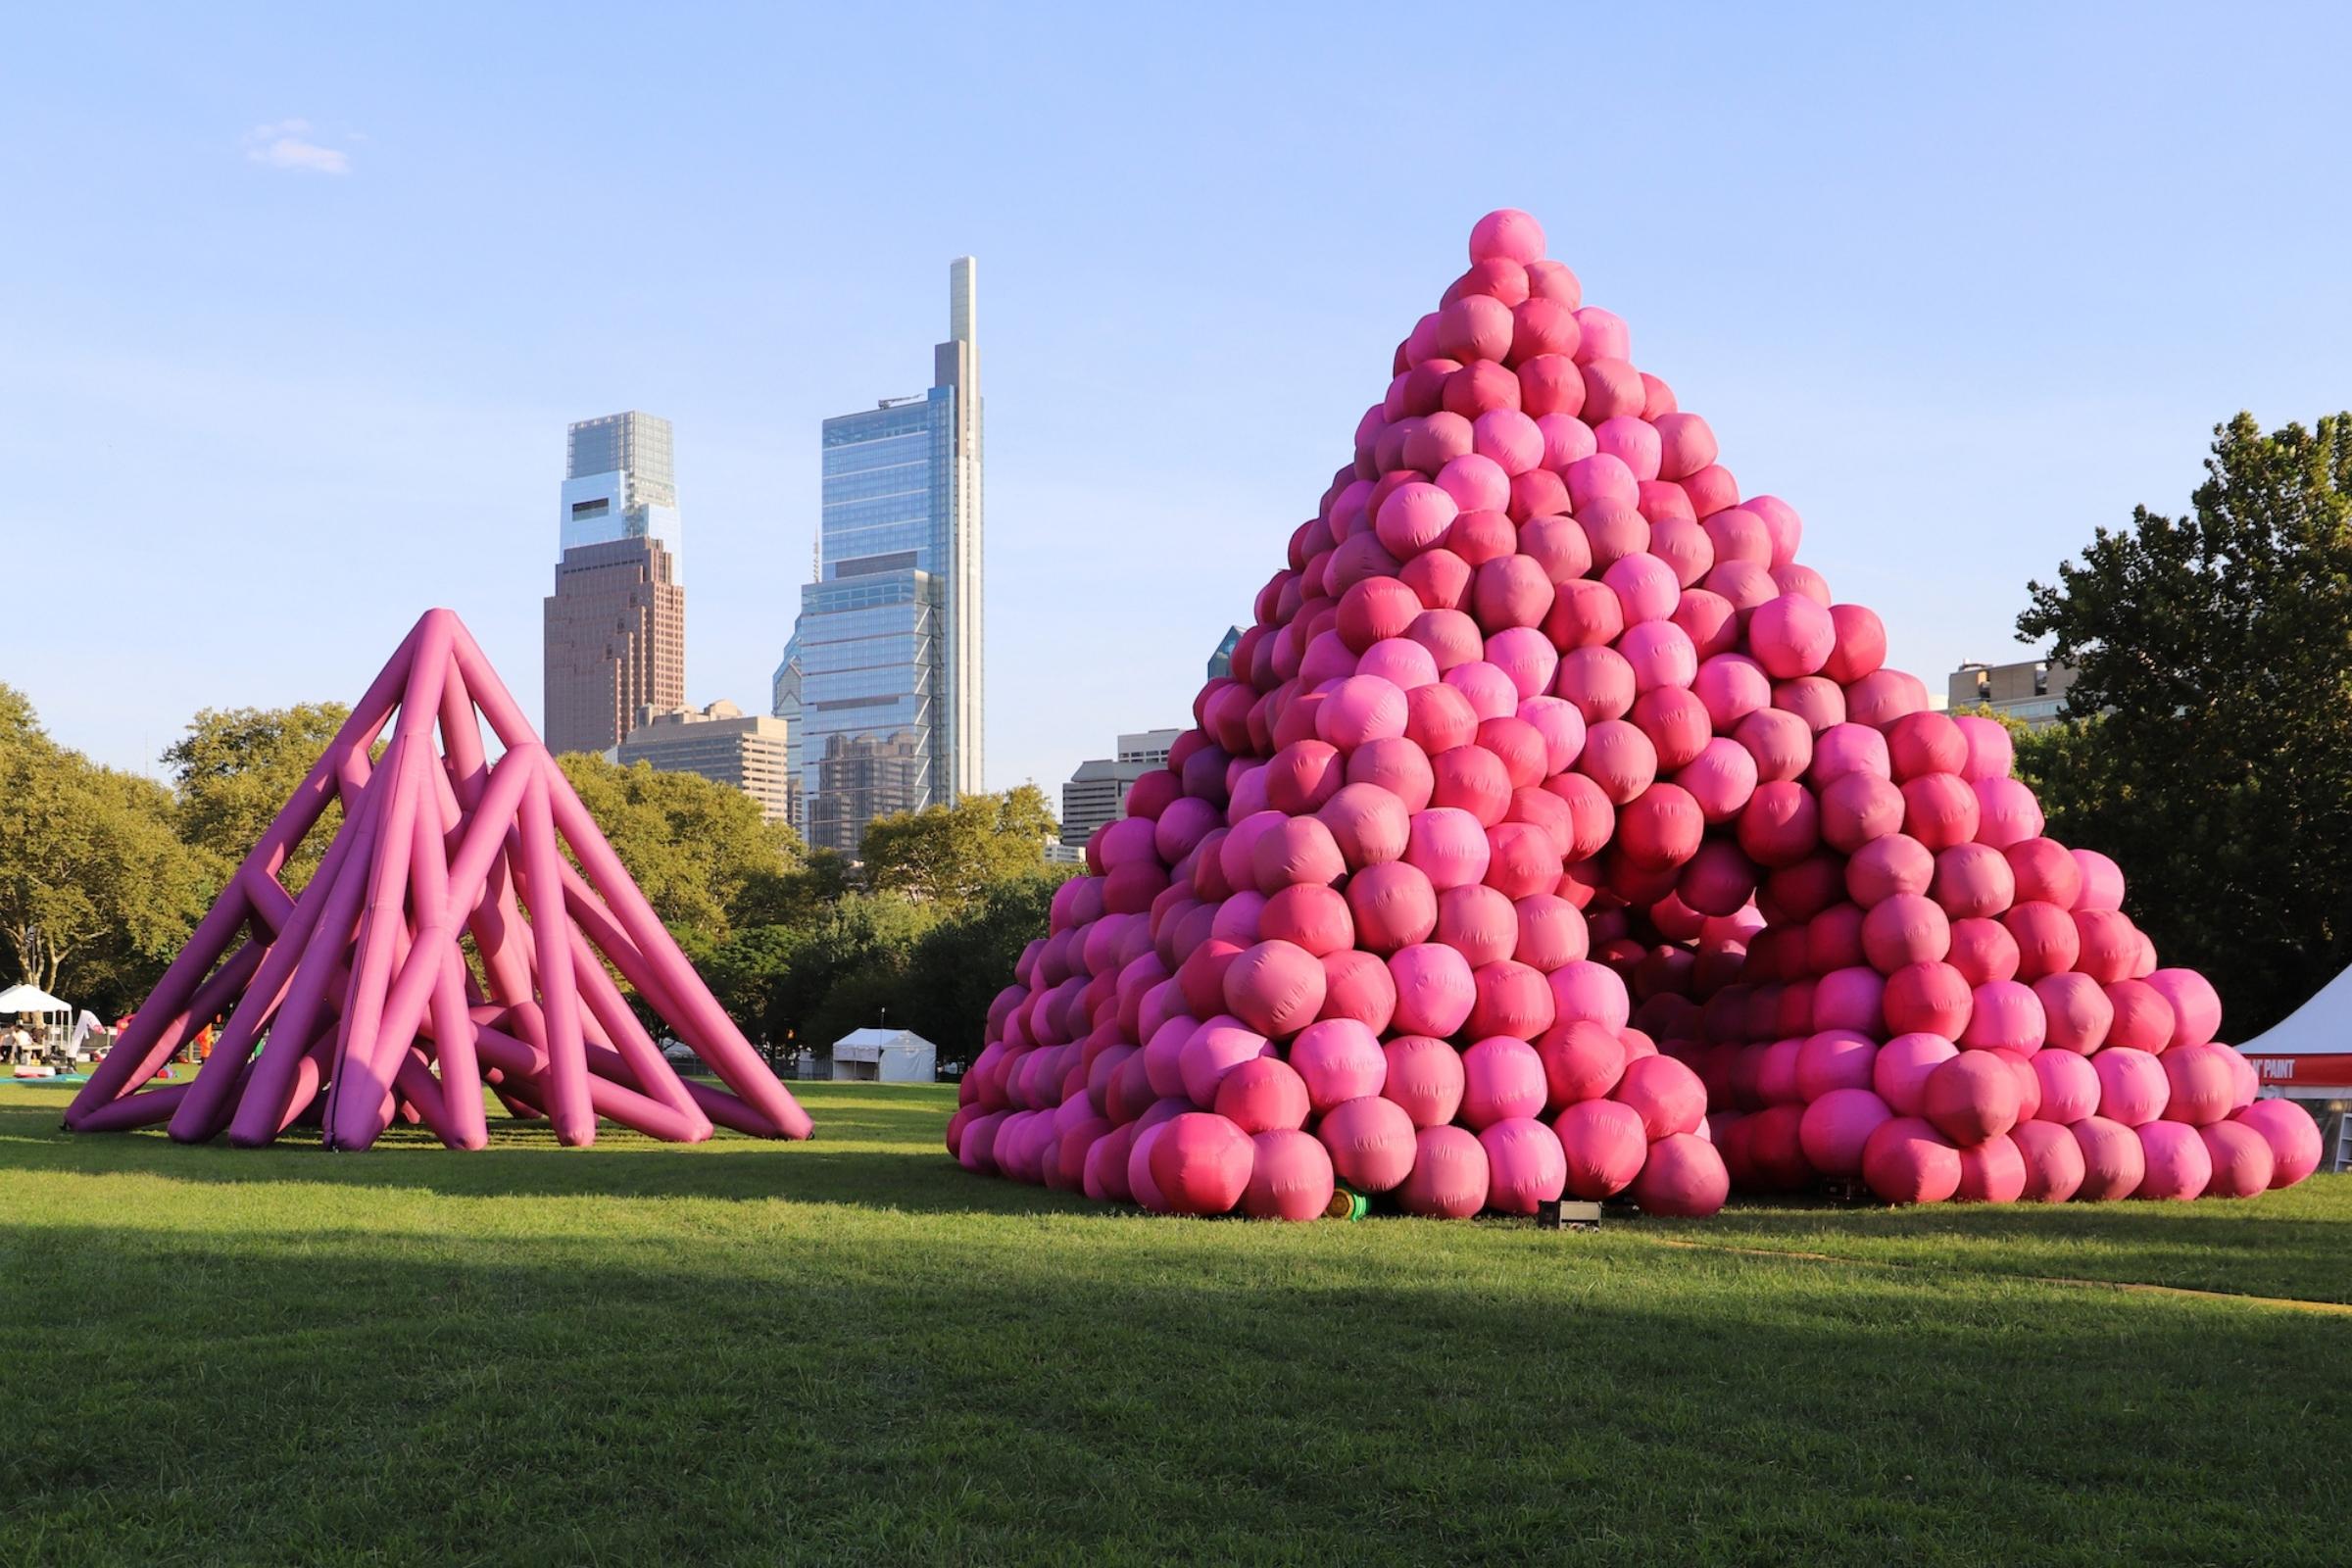 pink-sets-the-tone-in-the-immersive-installations-by-cyril-lancelin-featured